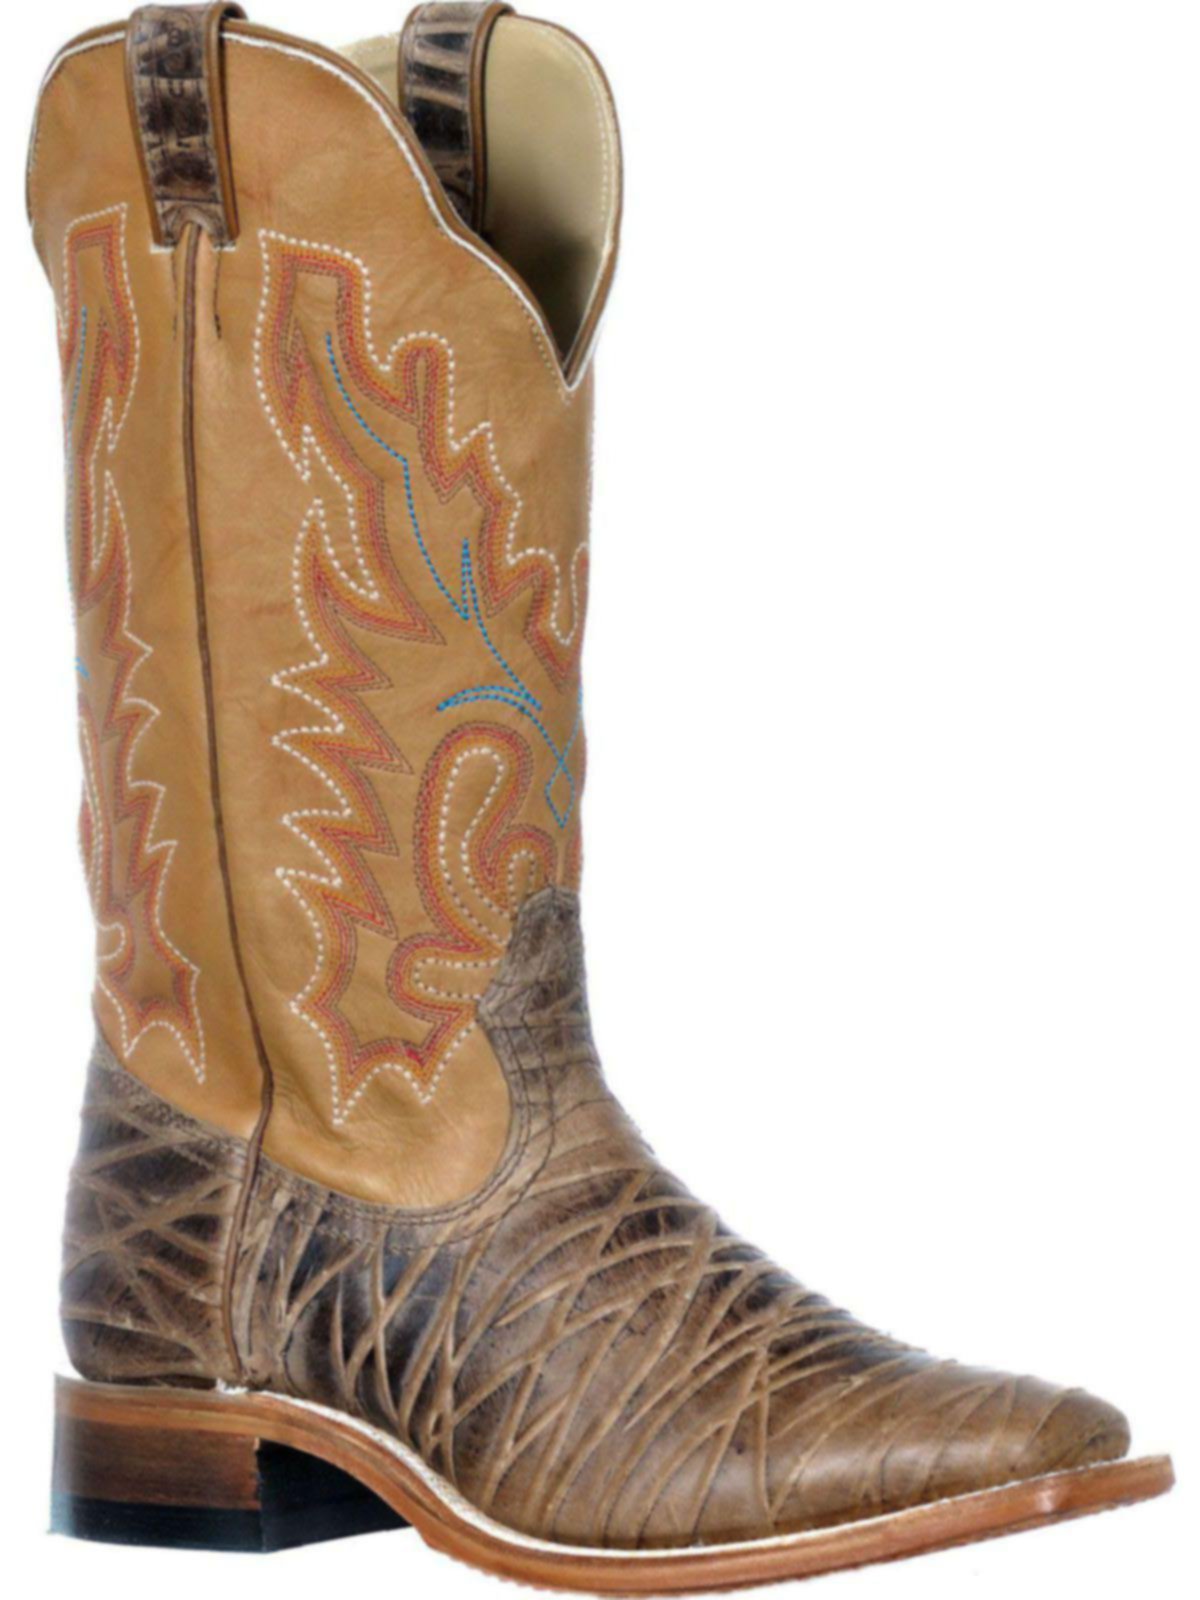 Shop Boulet Womens Deerlite Butterscotch Wide Square Toe Cowgirl Boot ...